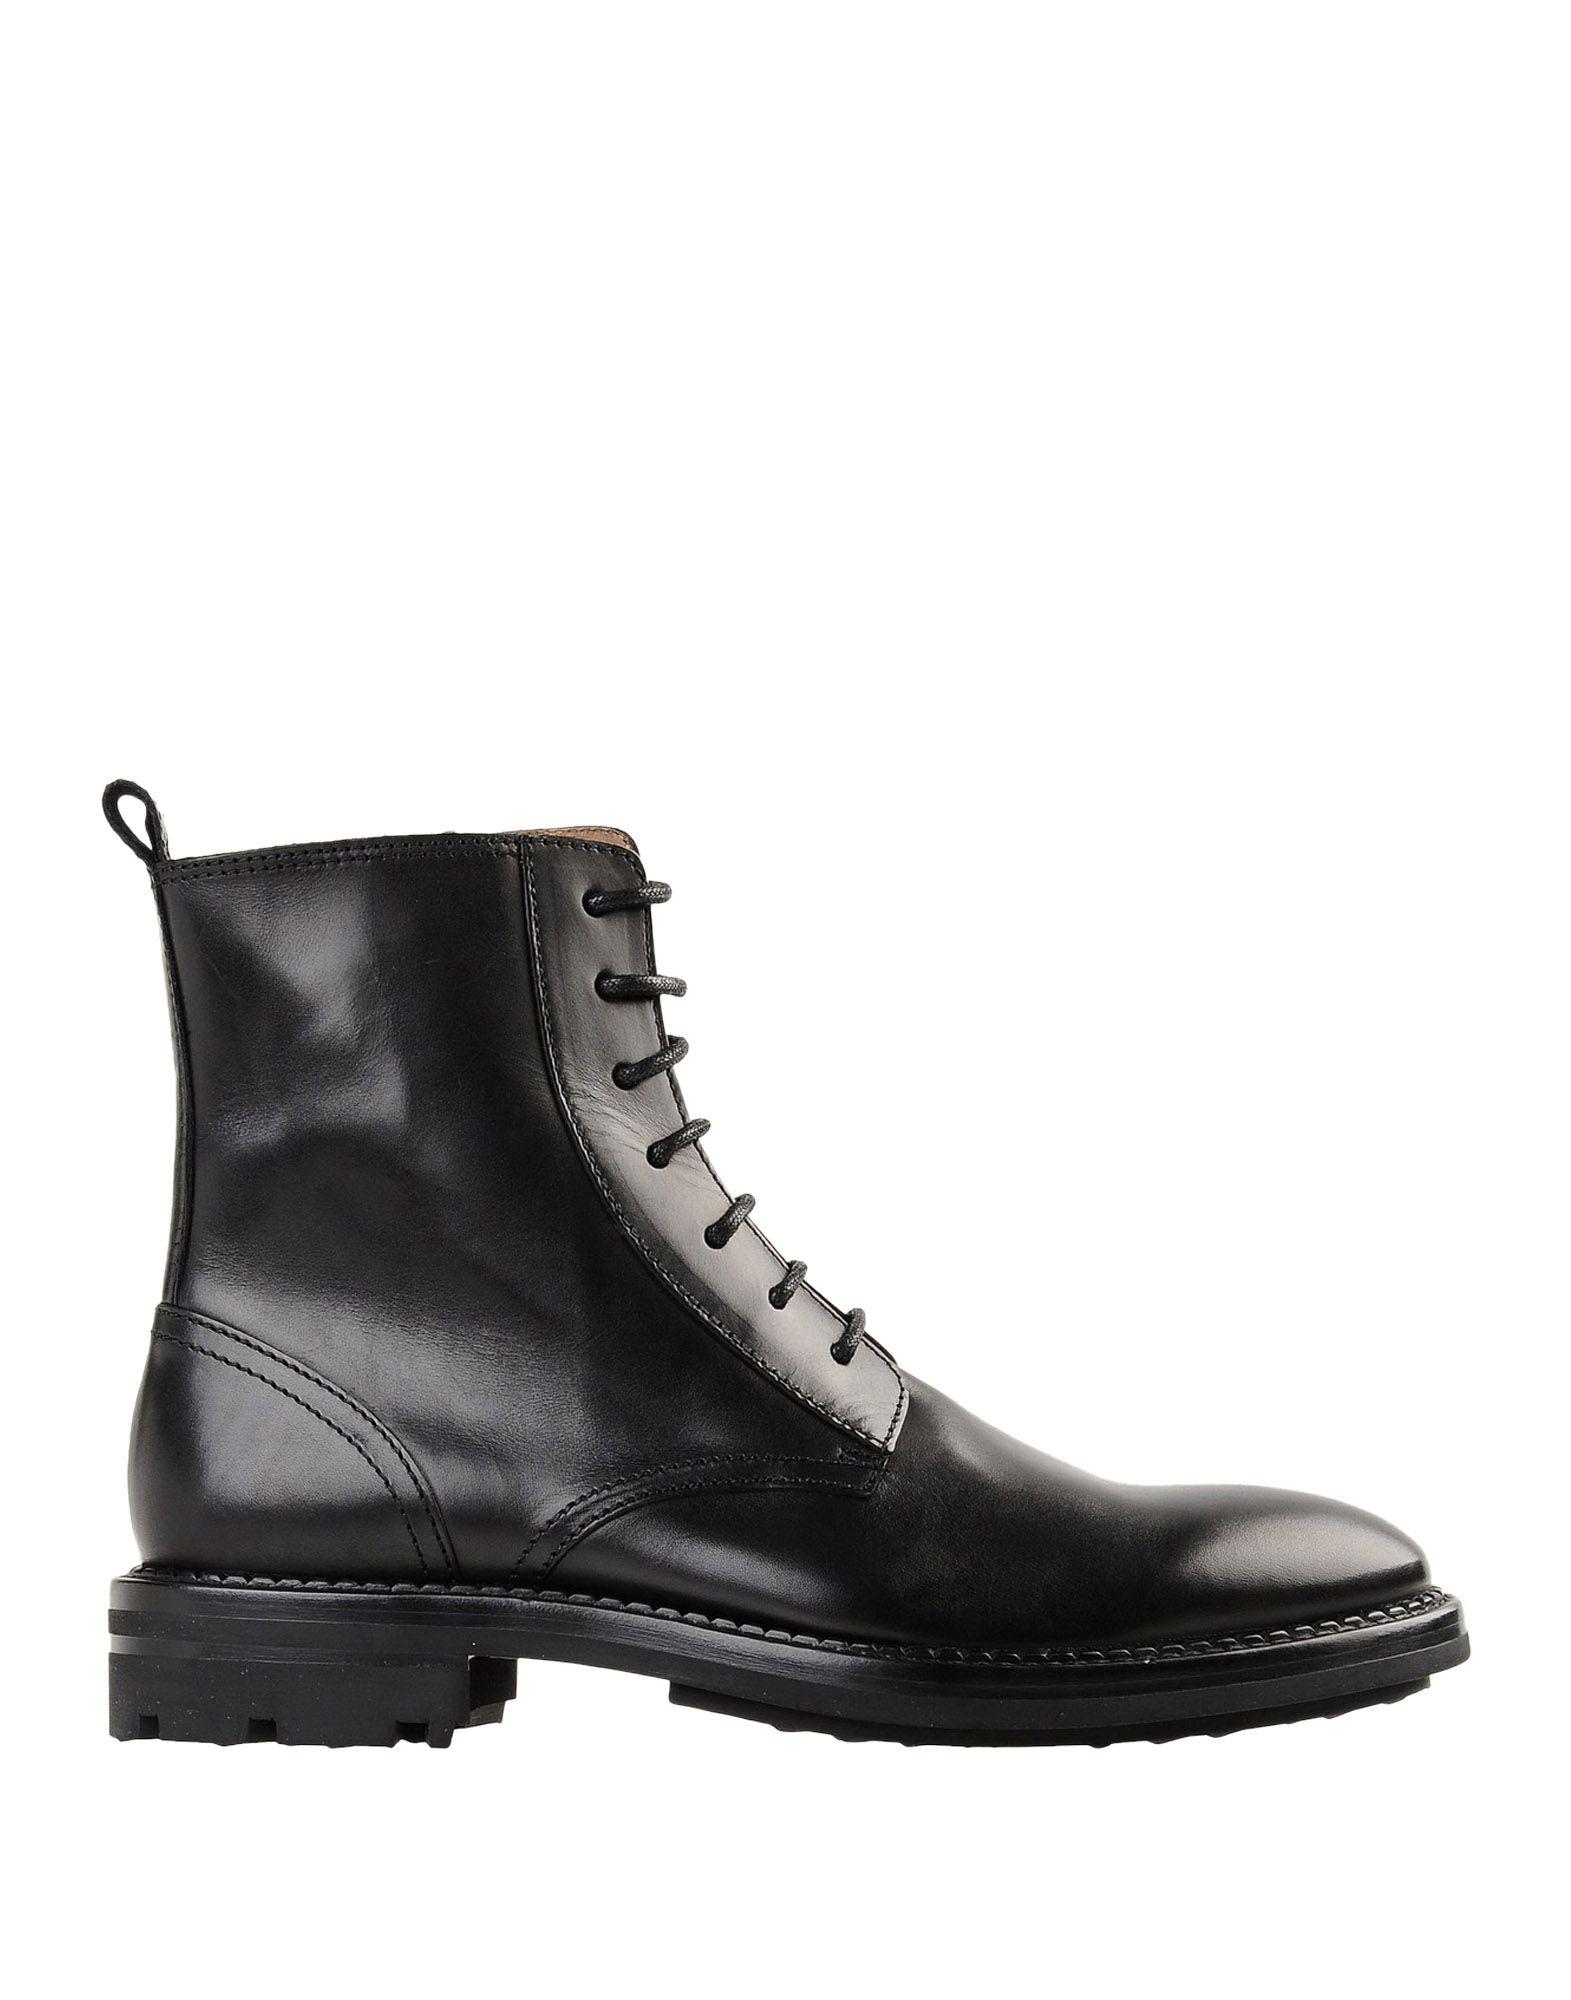 KENZO Leather Ankle Boots in Black for Men - Lyst